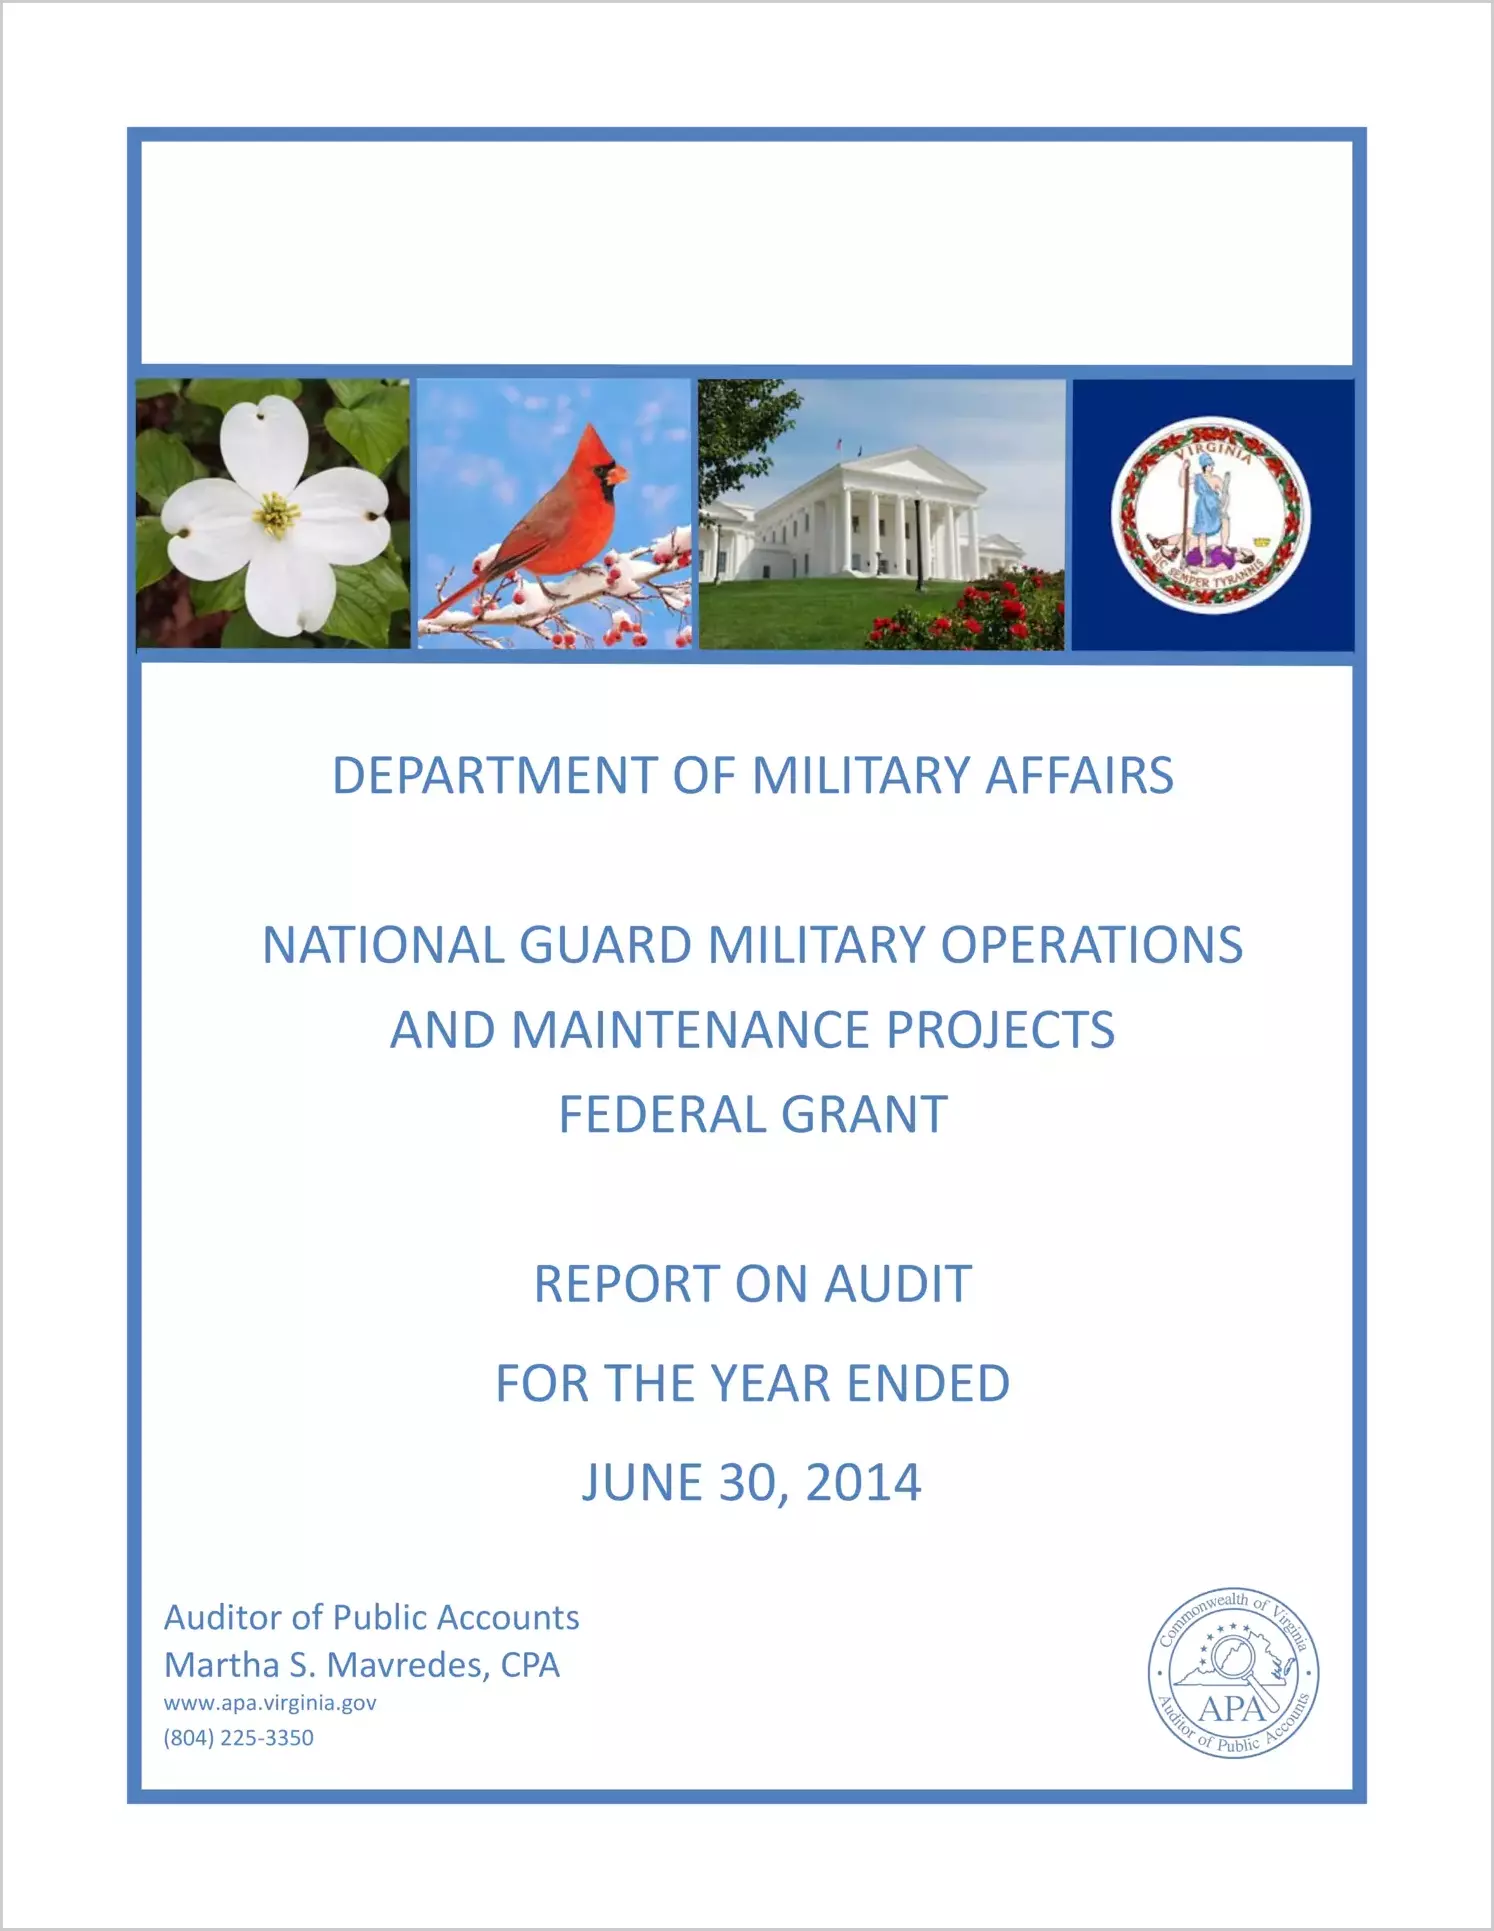 Department of Military Affairs - National Guard Military Operations and Maintenance Projects Federal Grant - Report on Audit for the year ended June 30, 2014